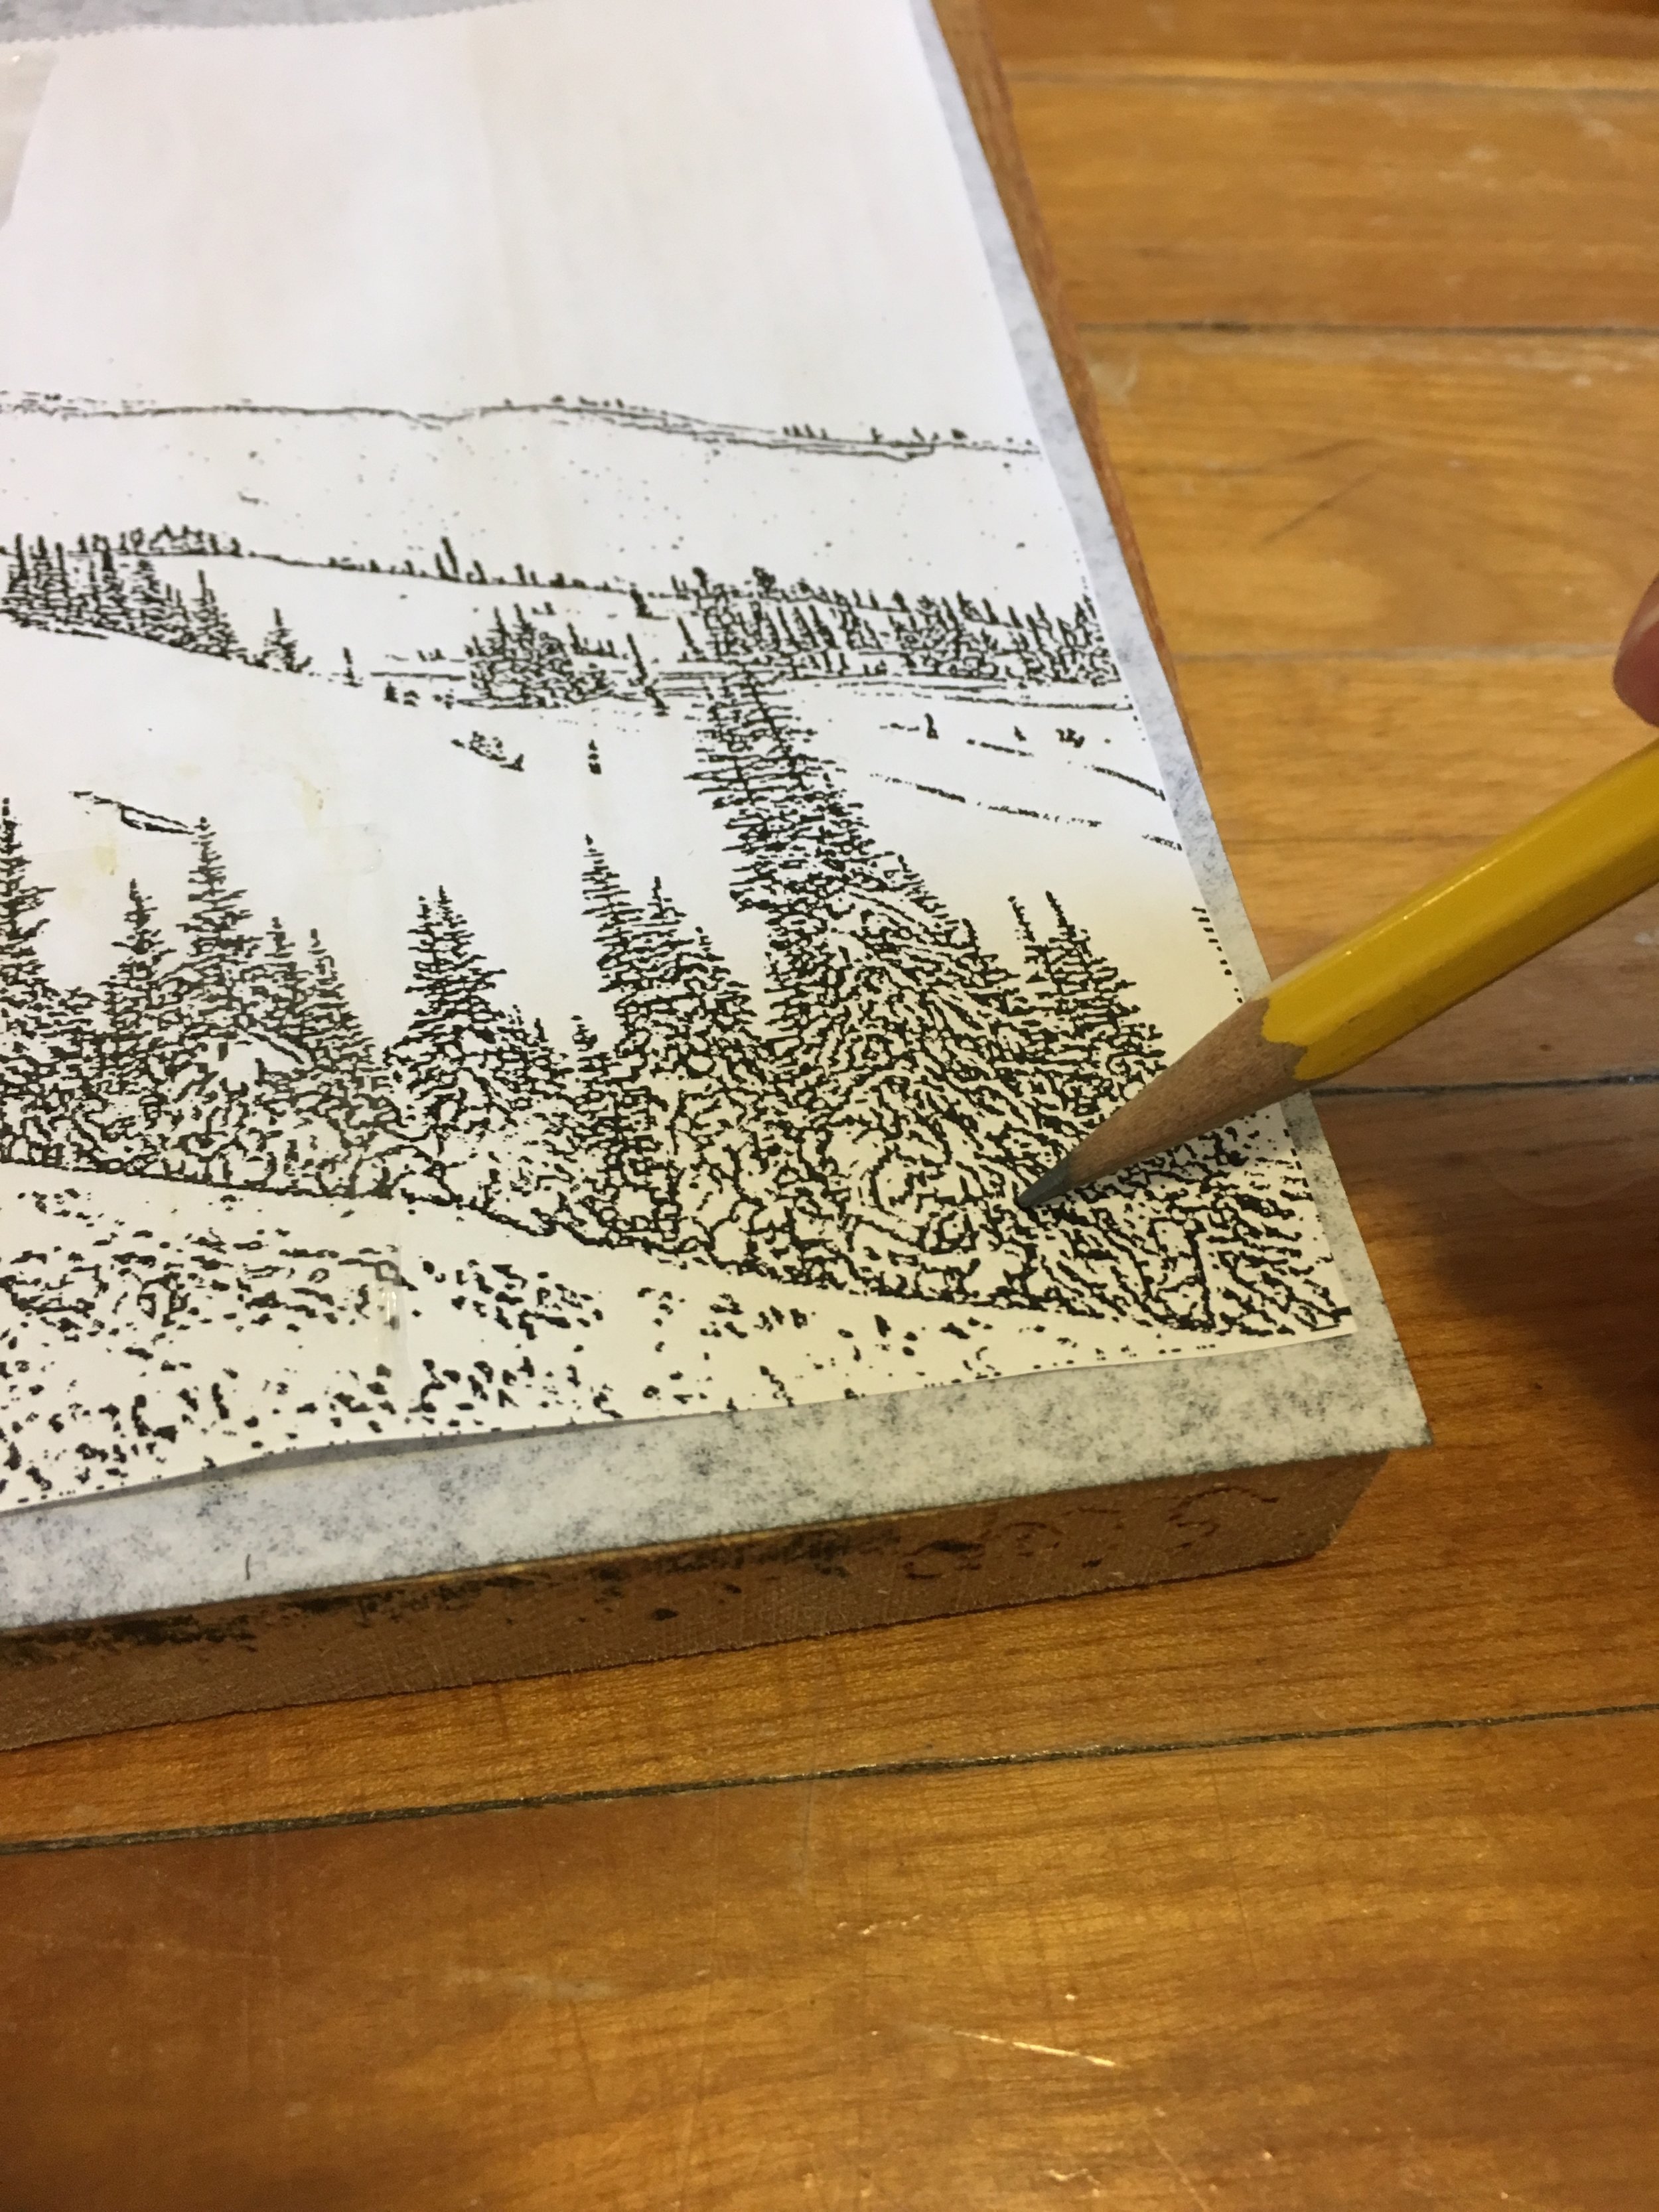 How to Wood Burn Using Carbon Paper Tracing #diy #woodburning